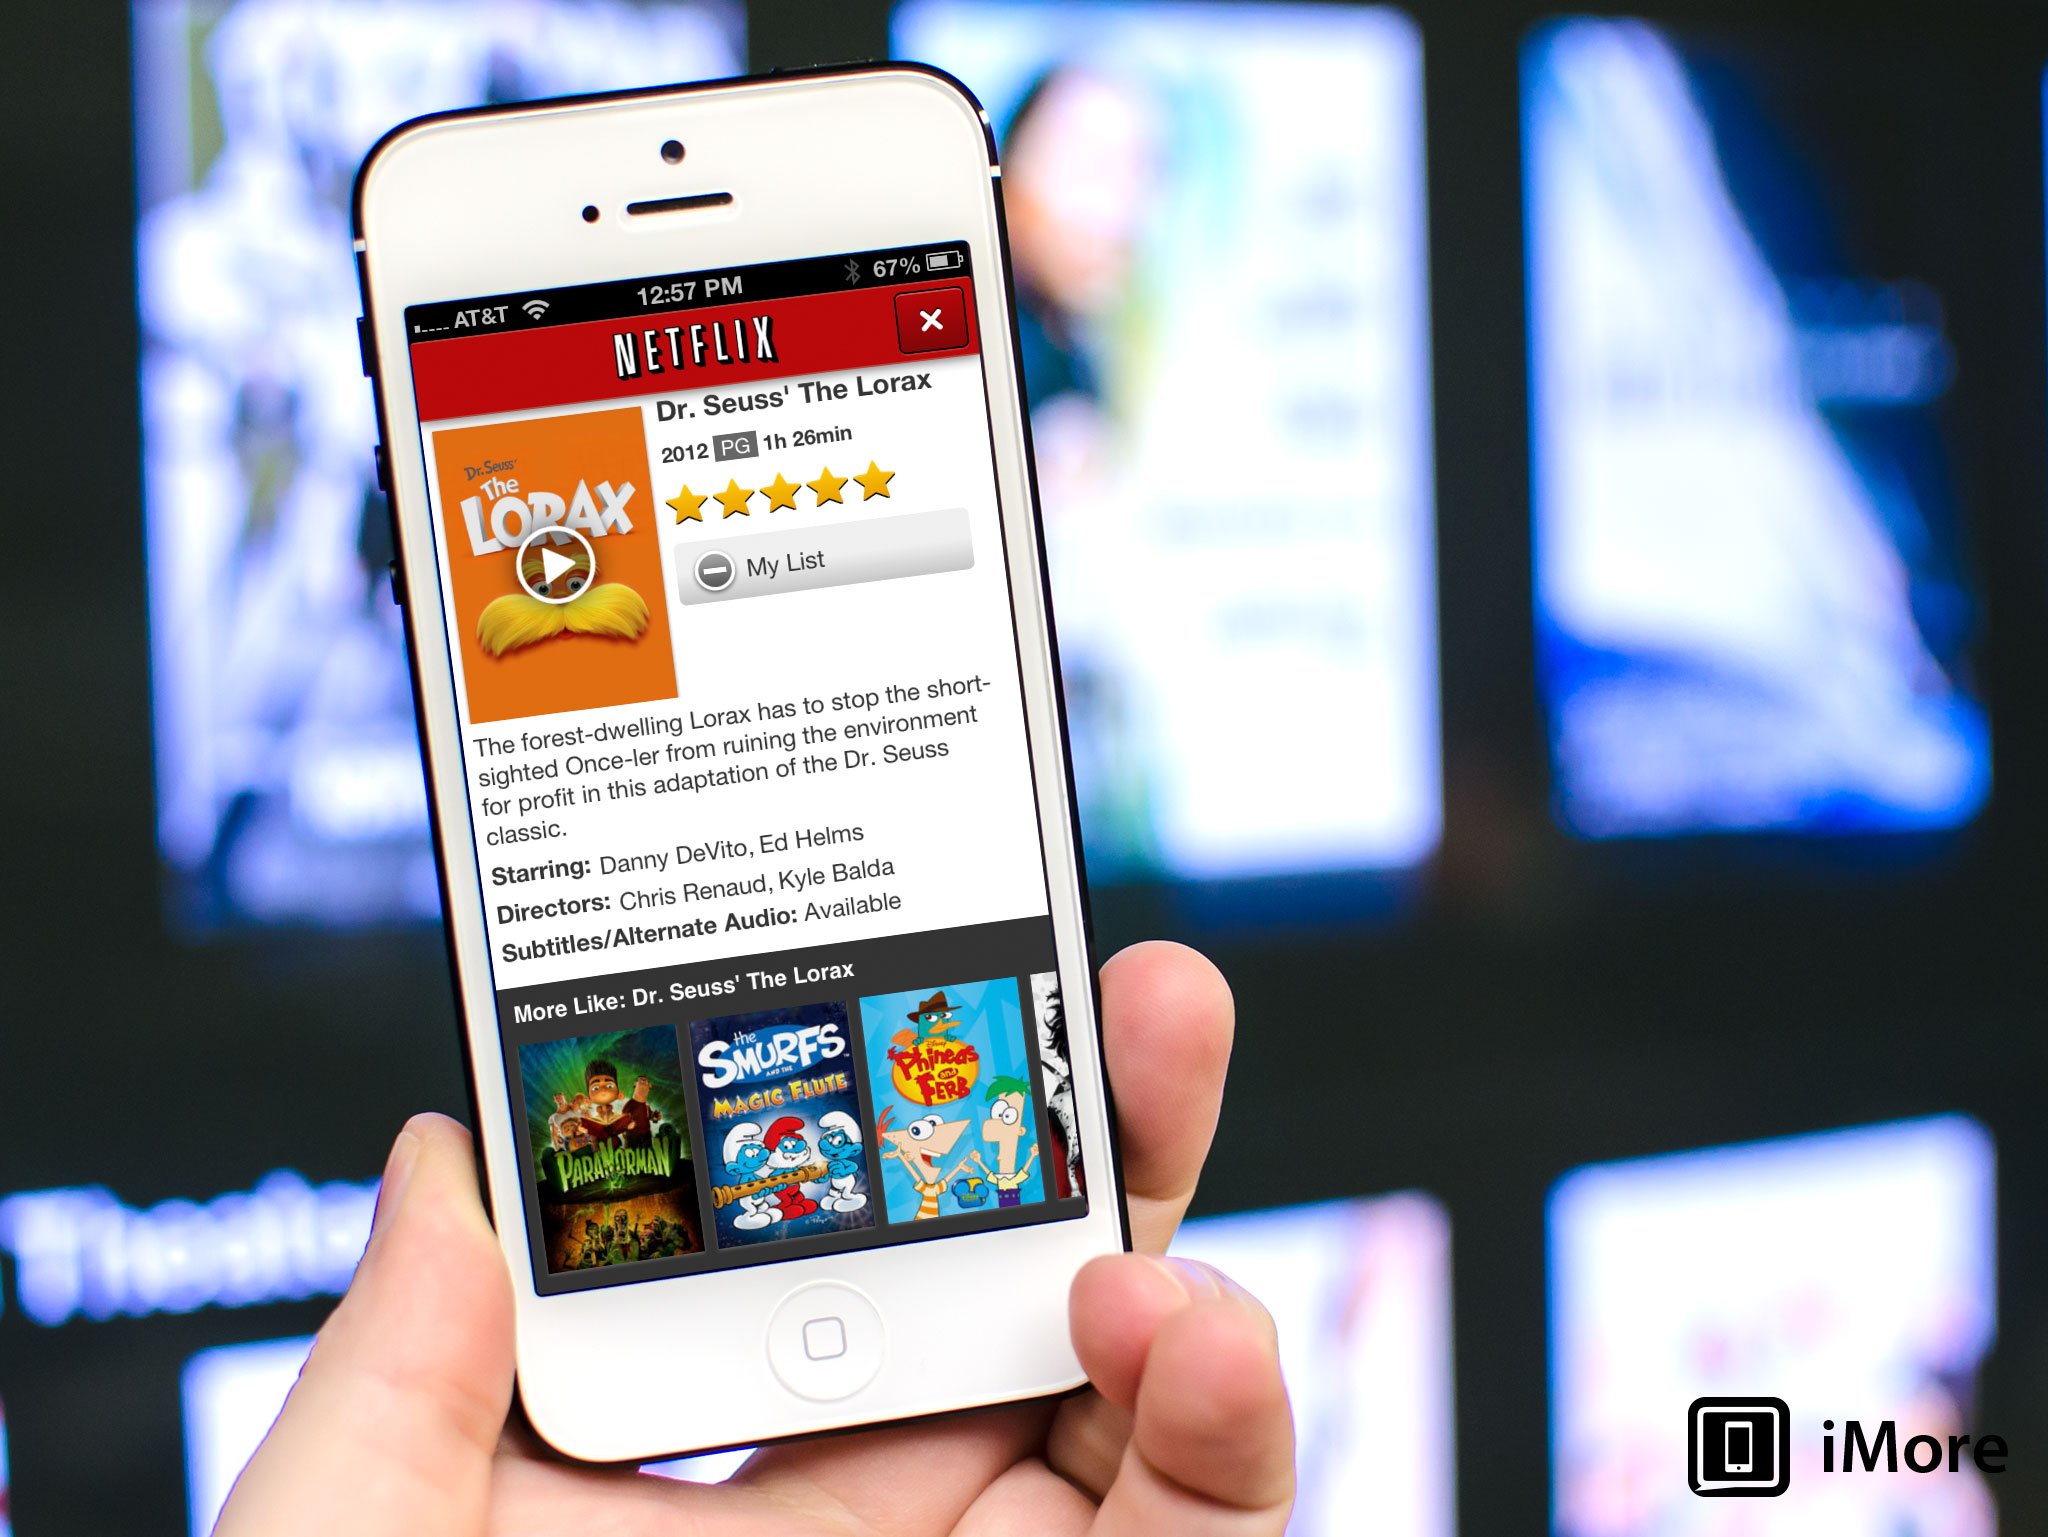 How to rate a movie or tv show with Netflix for iOS